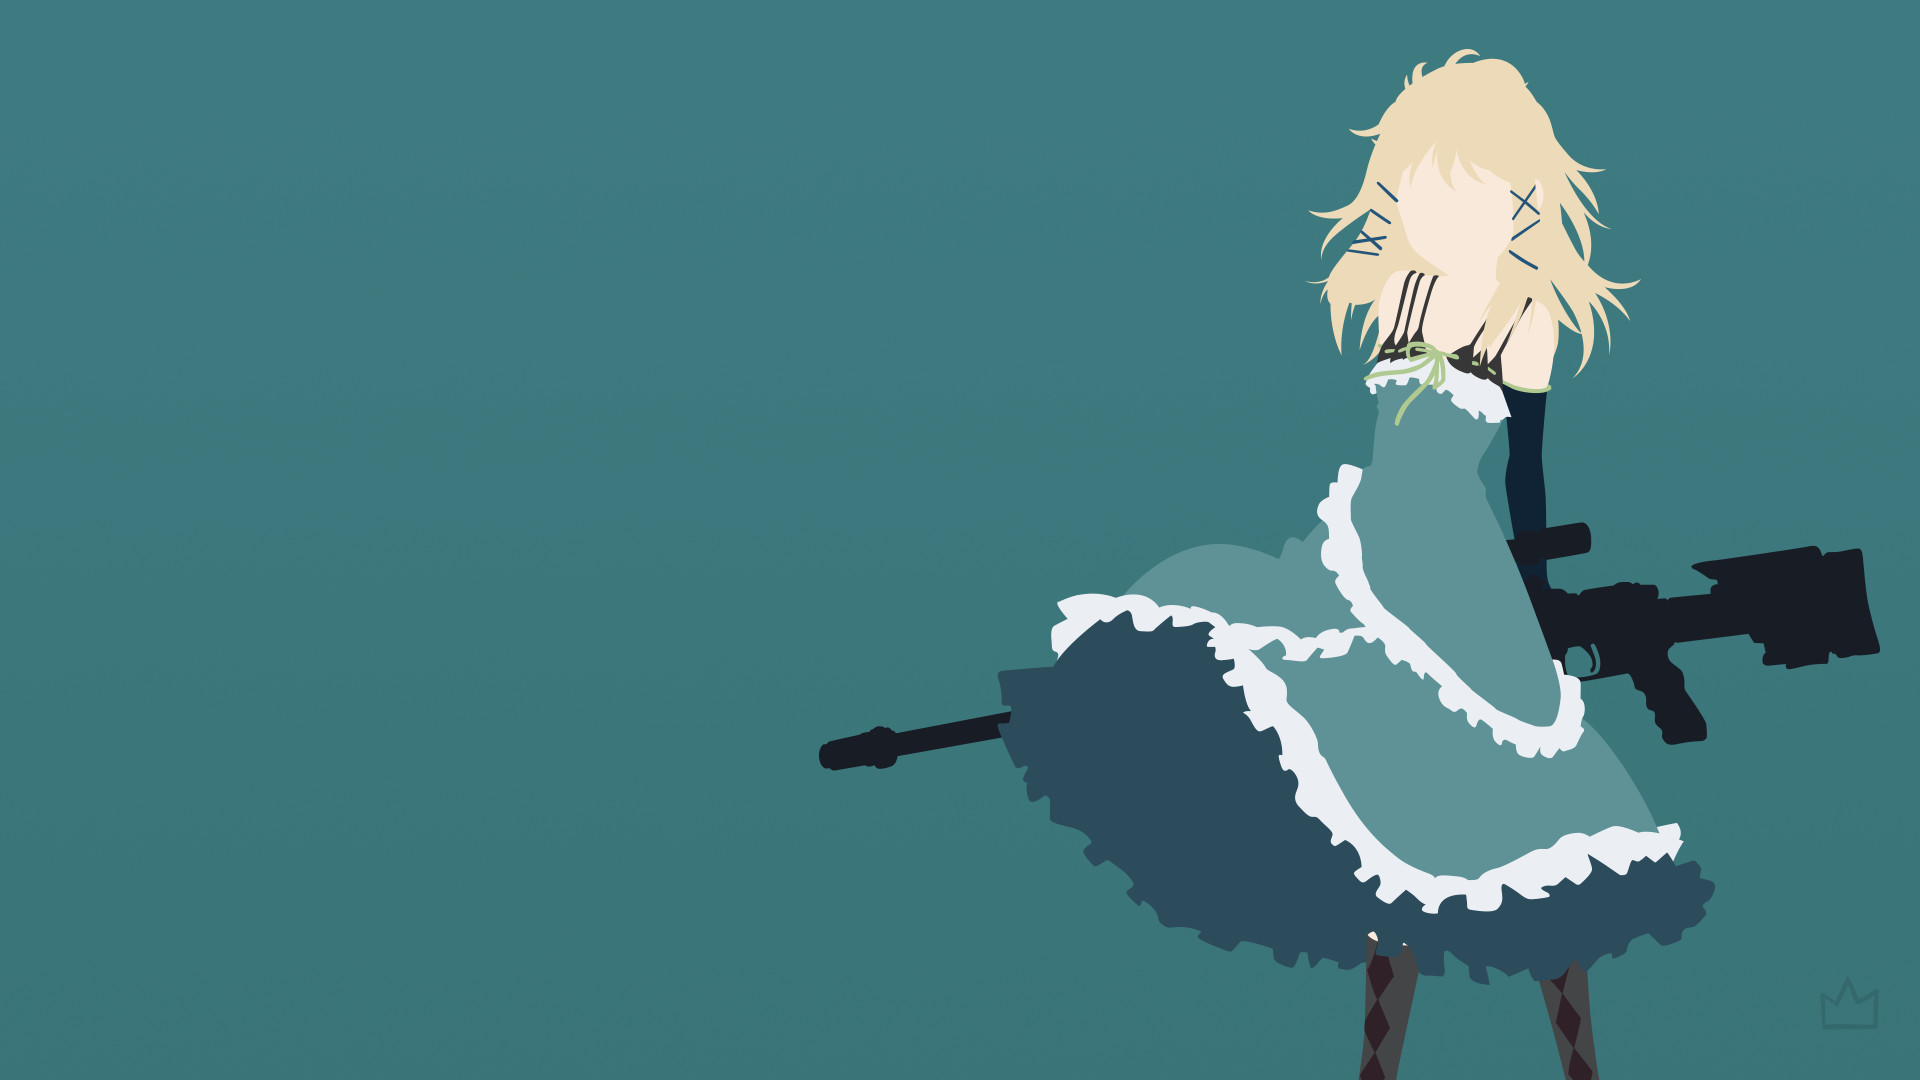 1920x1080 ... Tina Sprout (Black Bullet) by Klikster